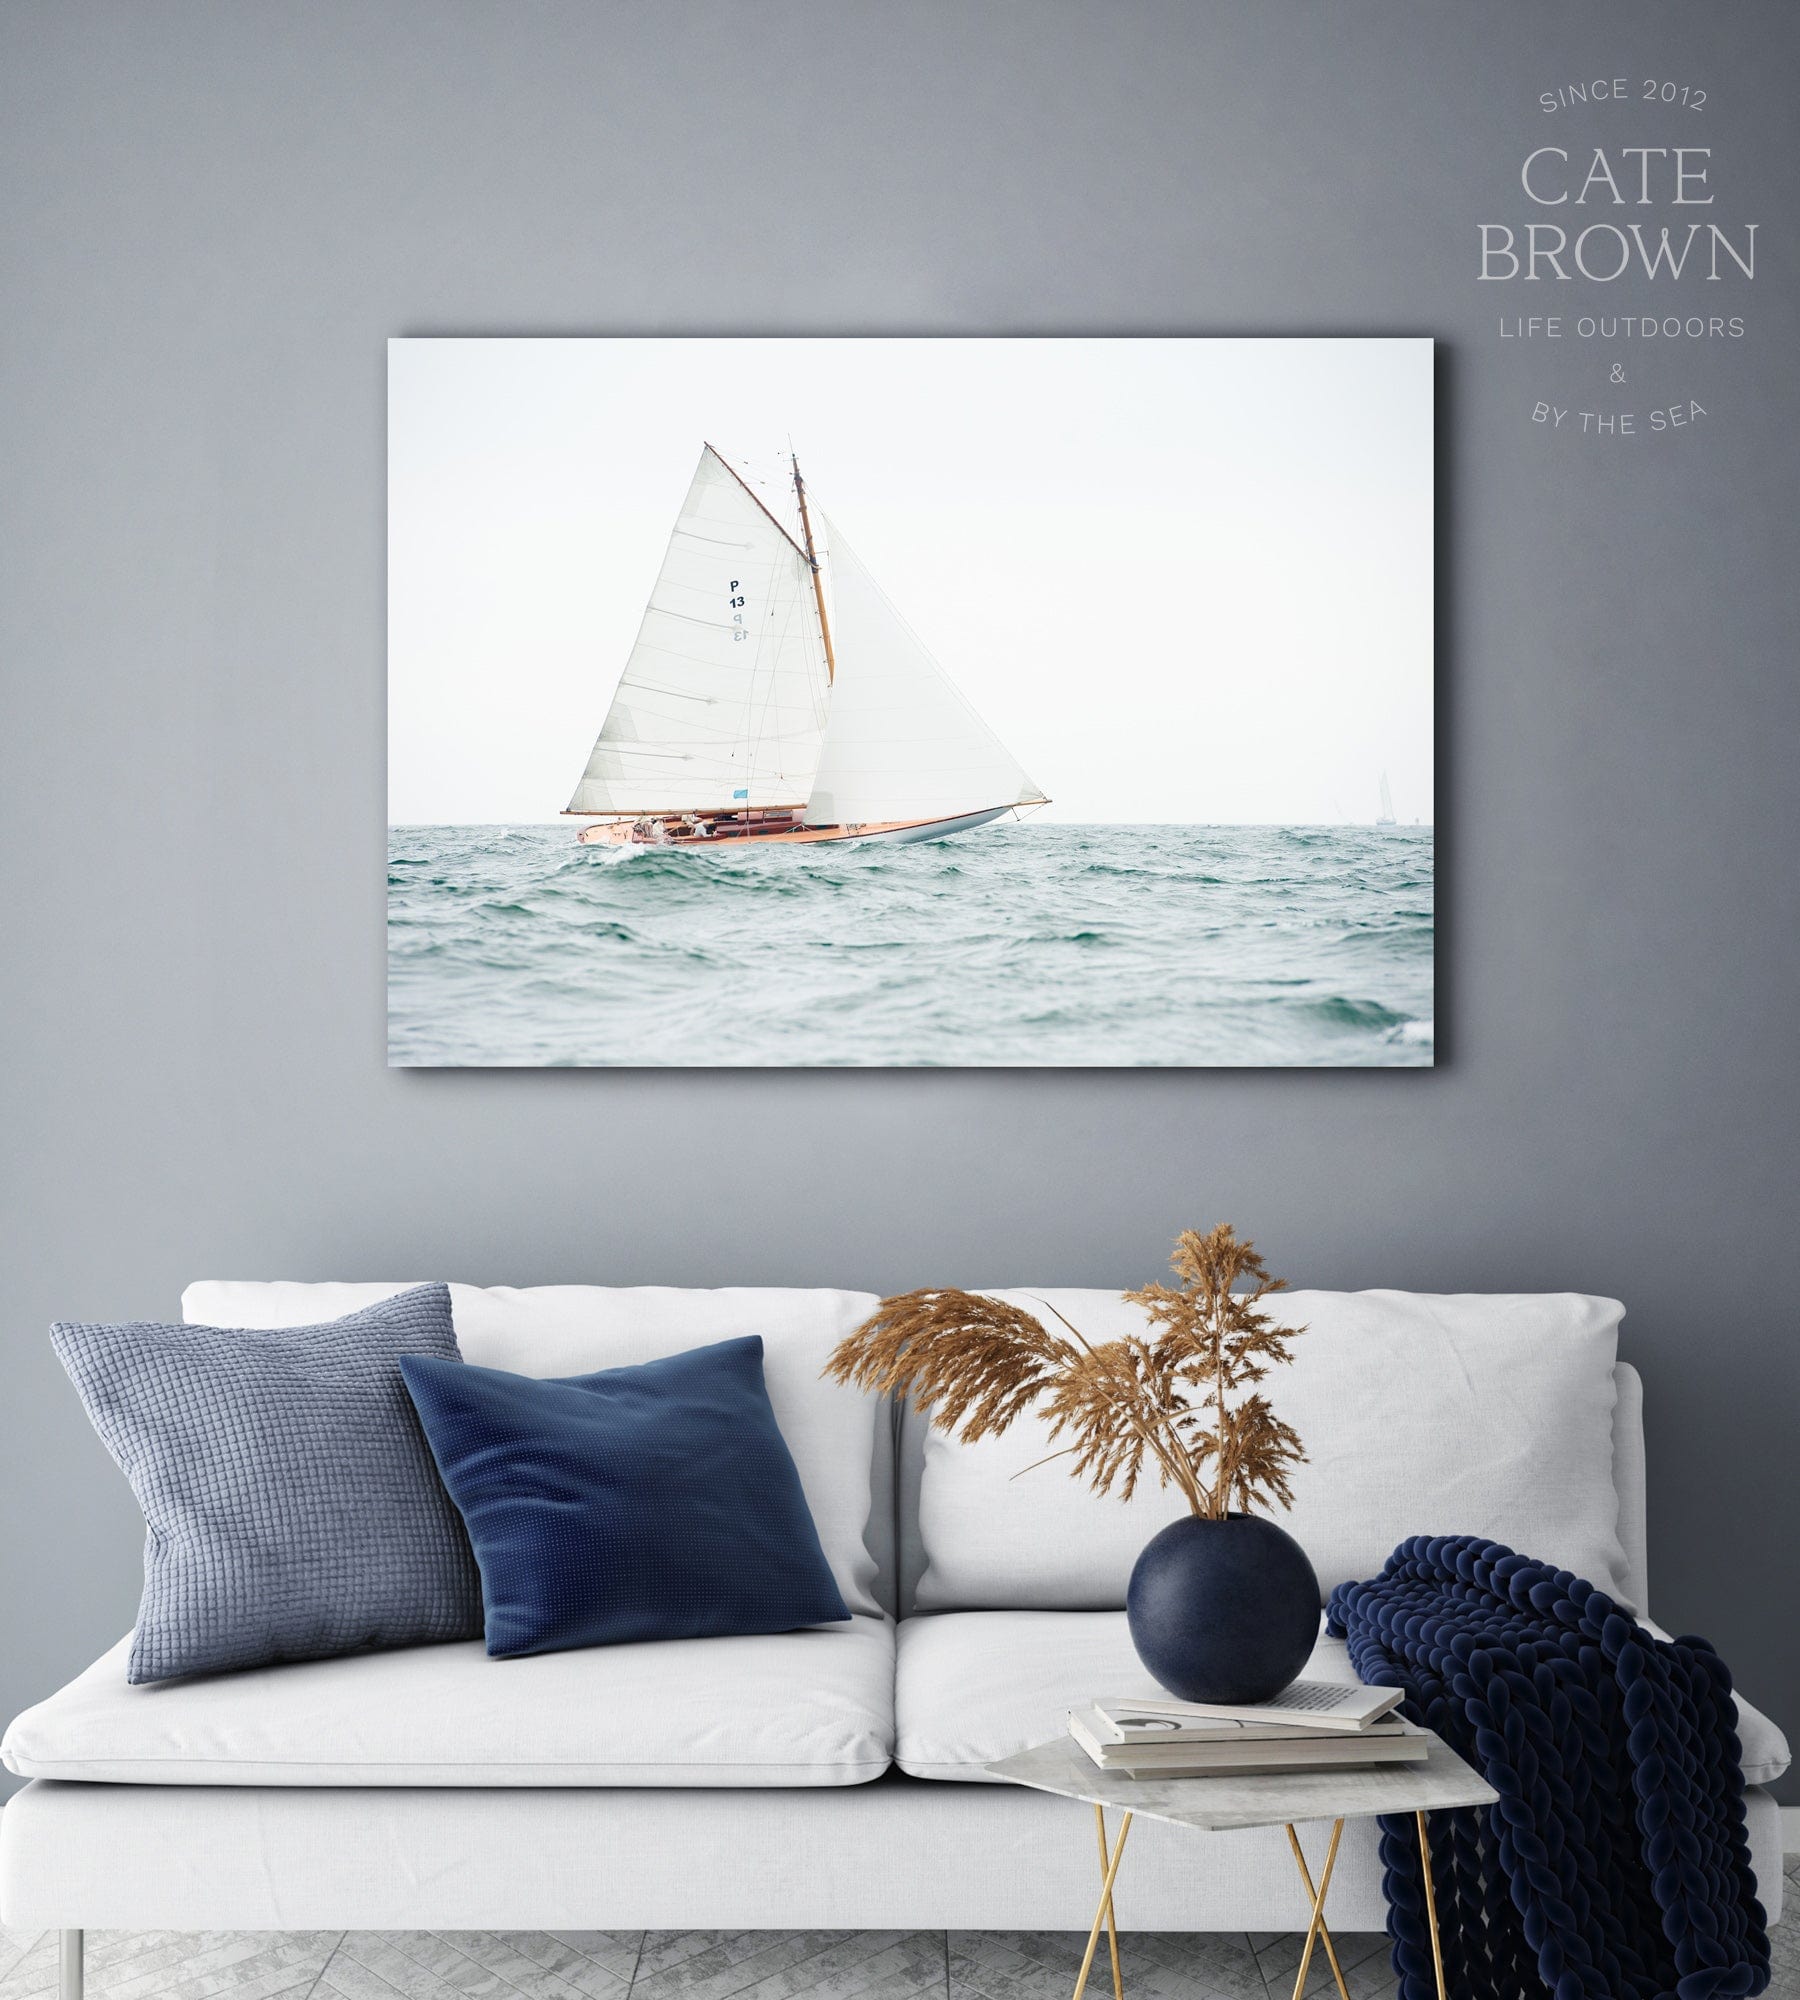 Cate Brown Photo Canvas / 16"x24" / None (Print Only) Sailing Open Seas  //  Nautical Photography Made to Order Ocean Fine Art